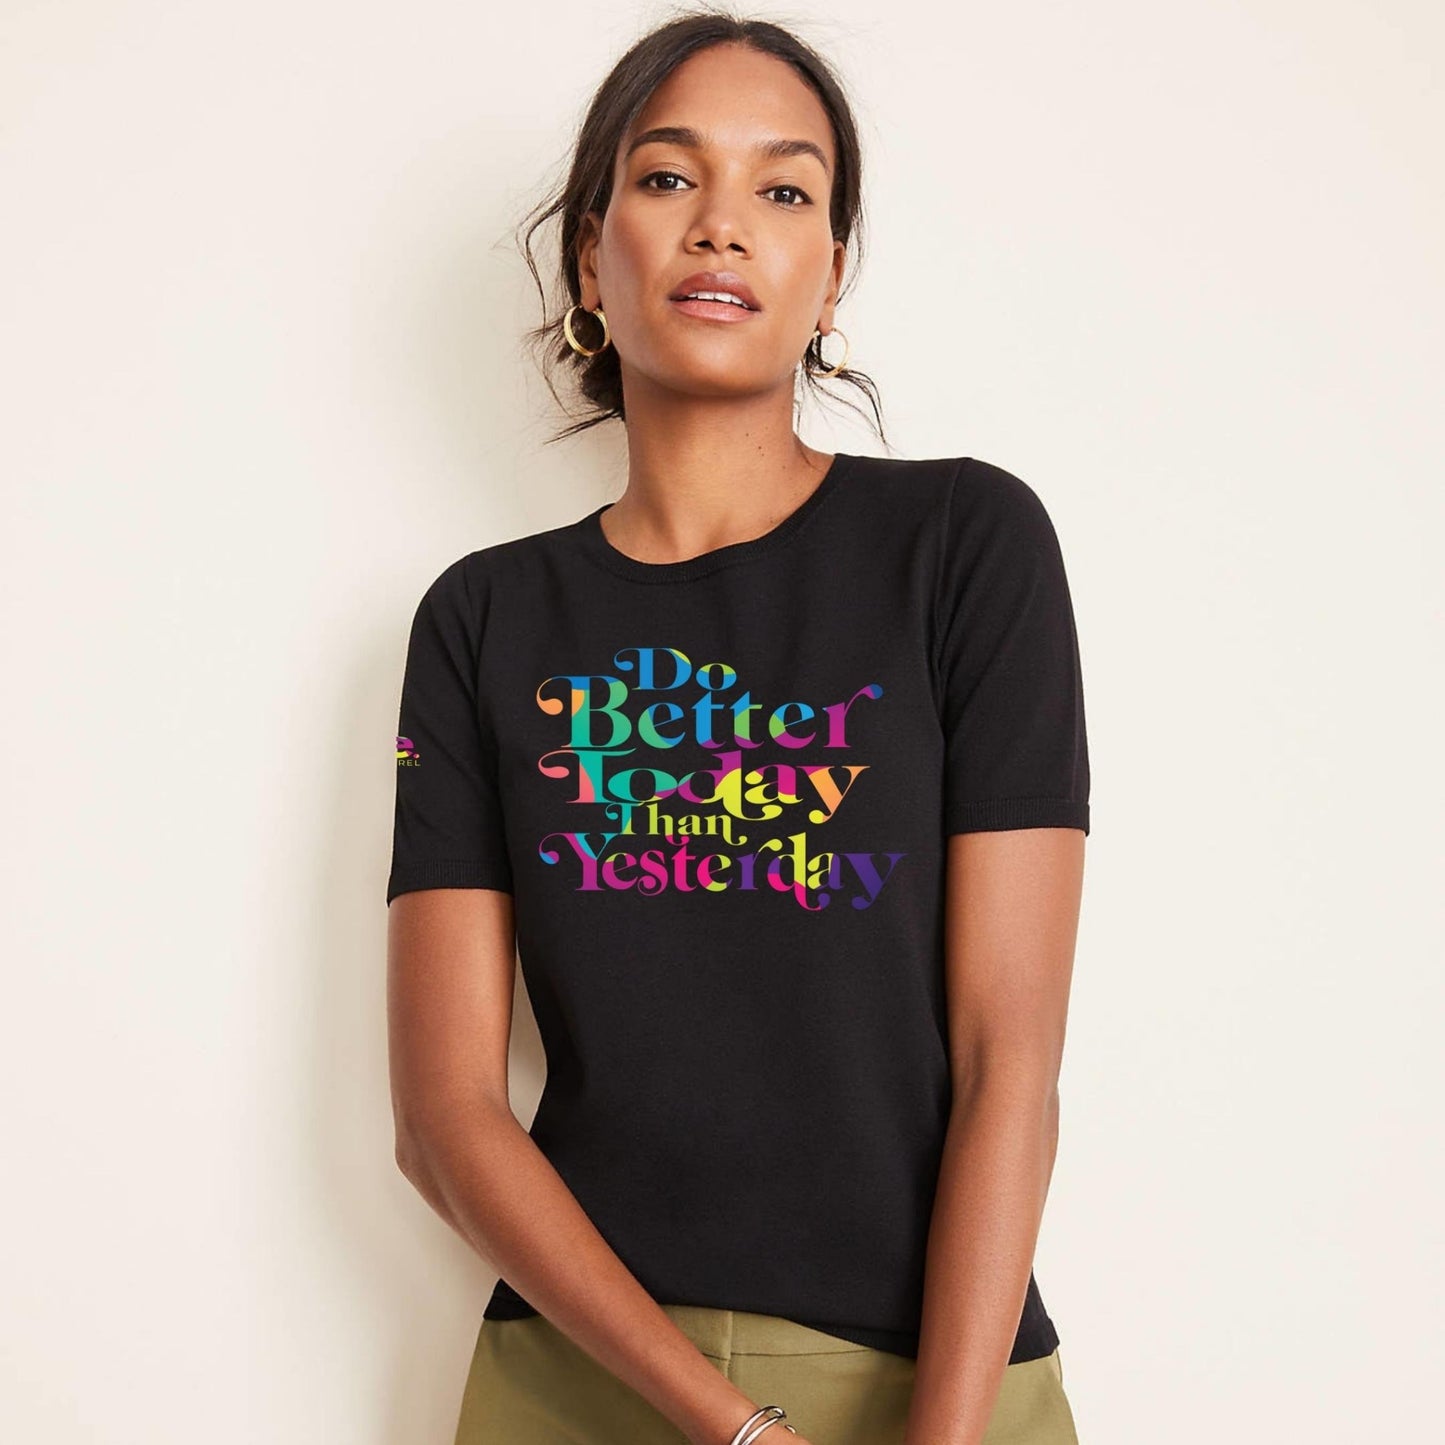 DO BETTER TODAY THAN YESTERDAY - Multicolored Black Tee